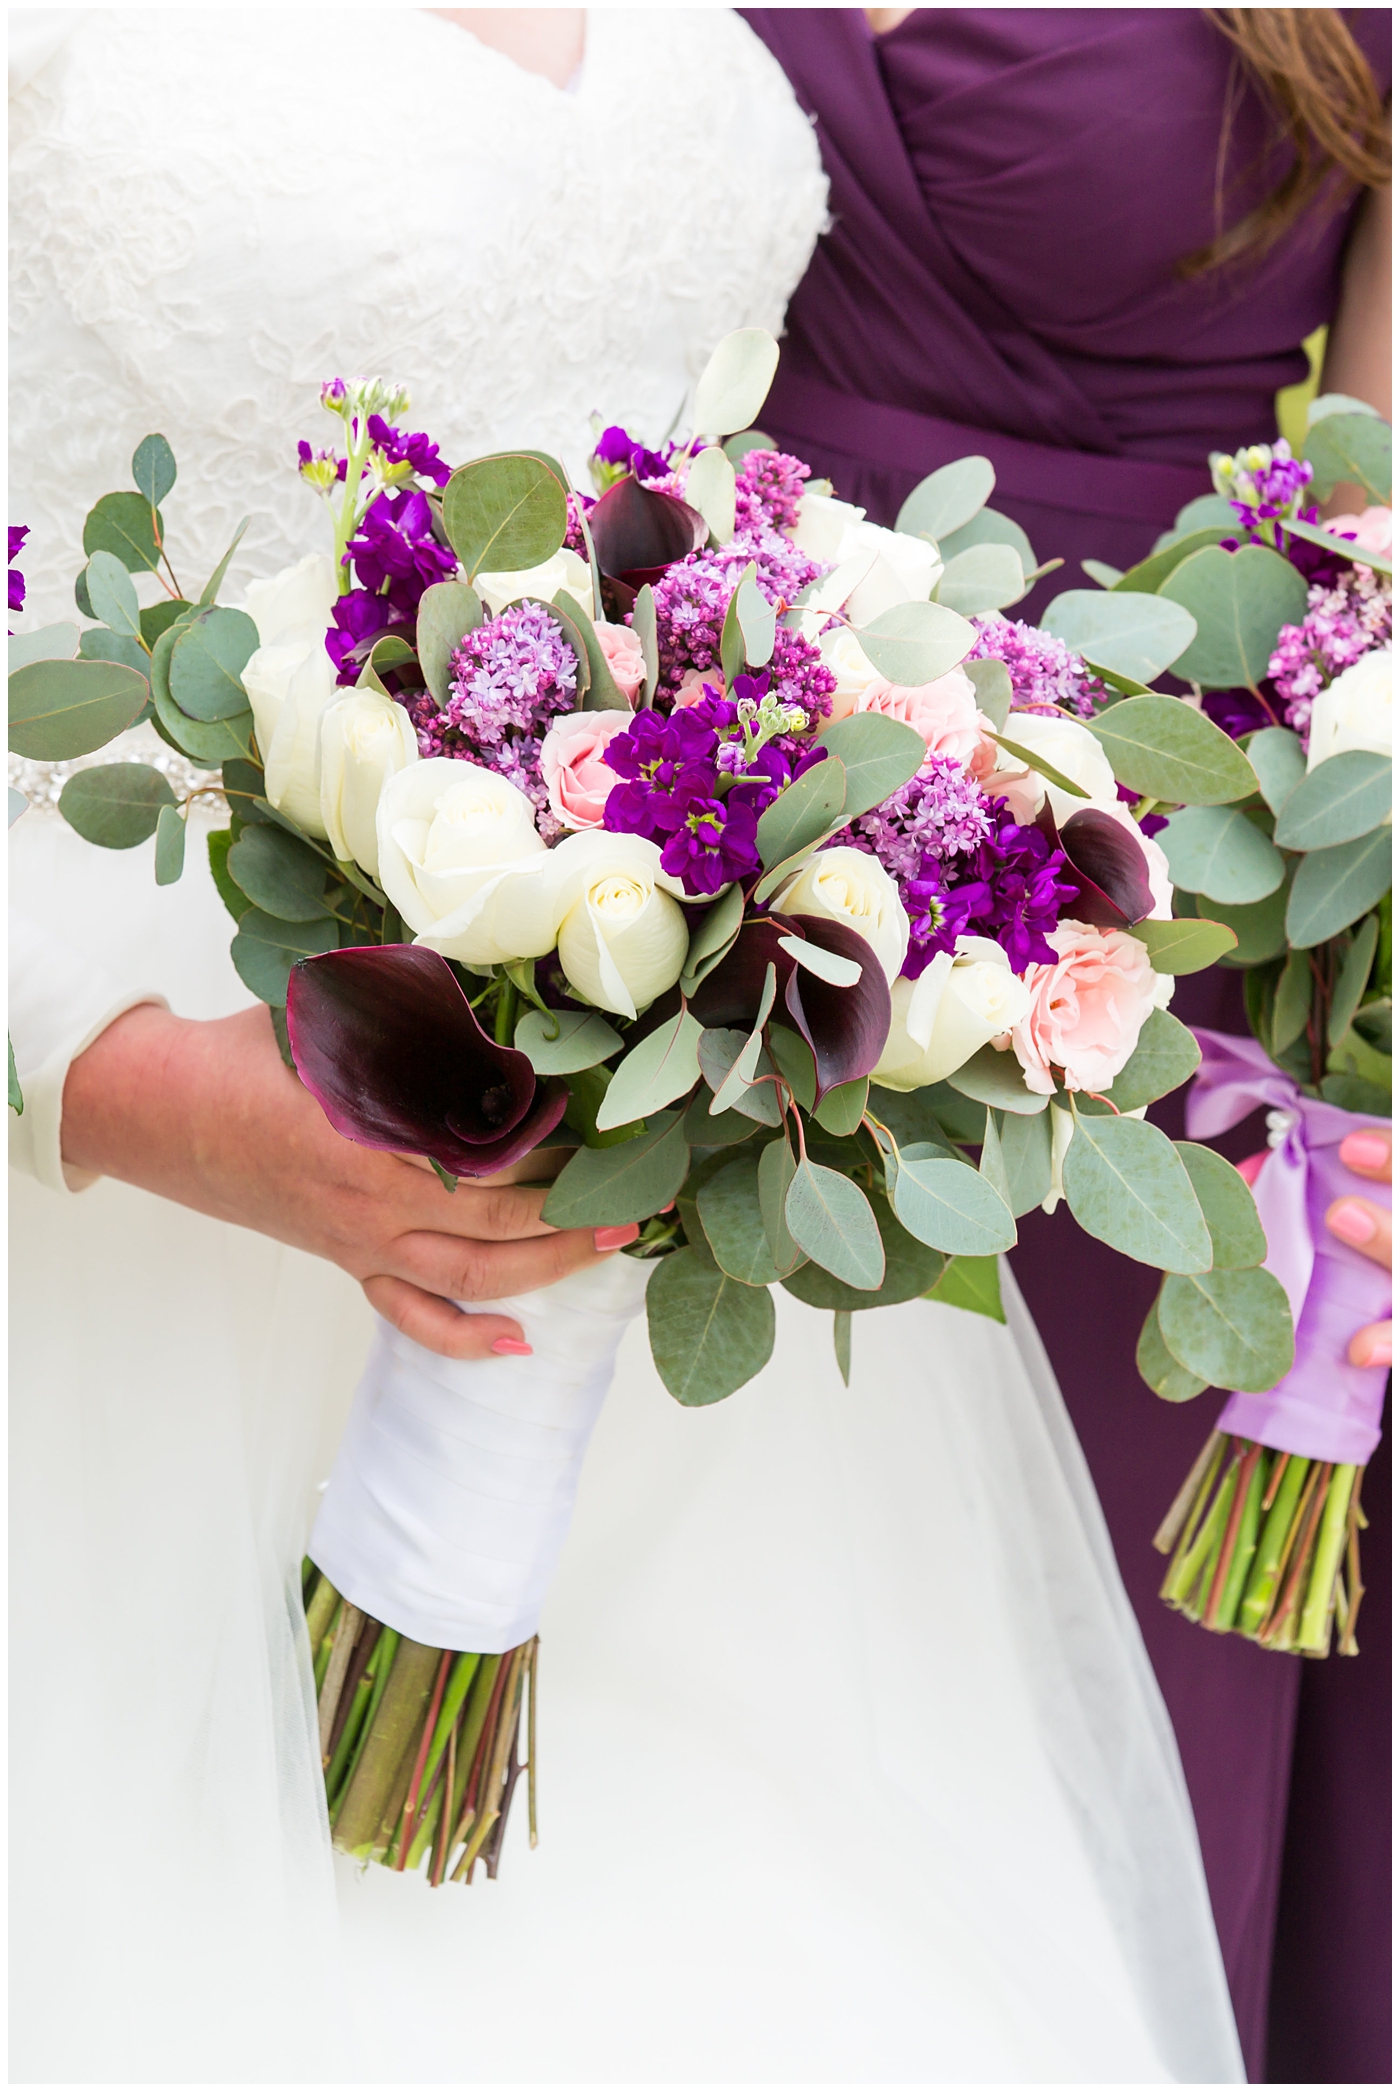 blonde bride in long sleeve wedding dress with purple and white flower bouquet with bridesmaids in plum dresses on wedding day bridal party portrait